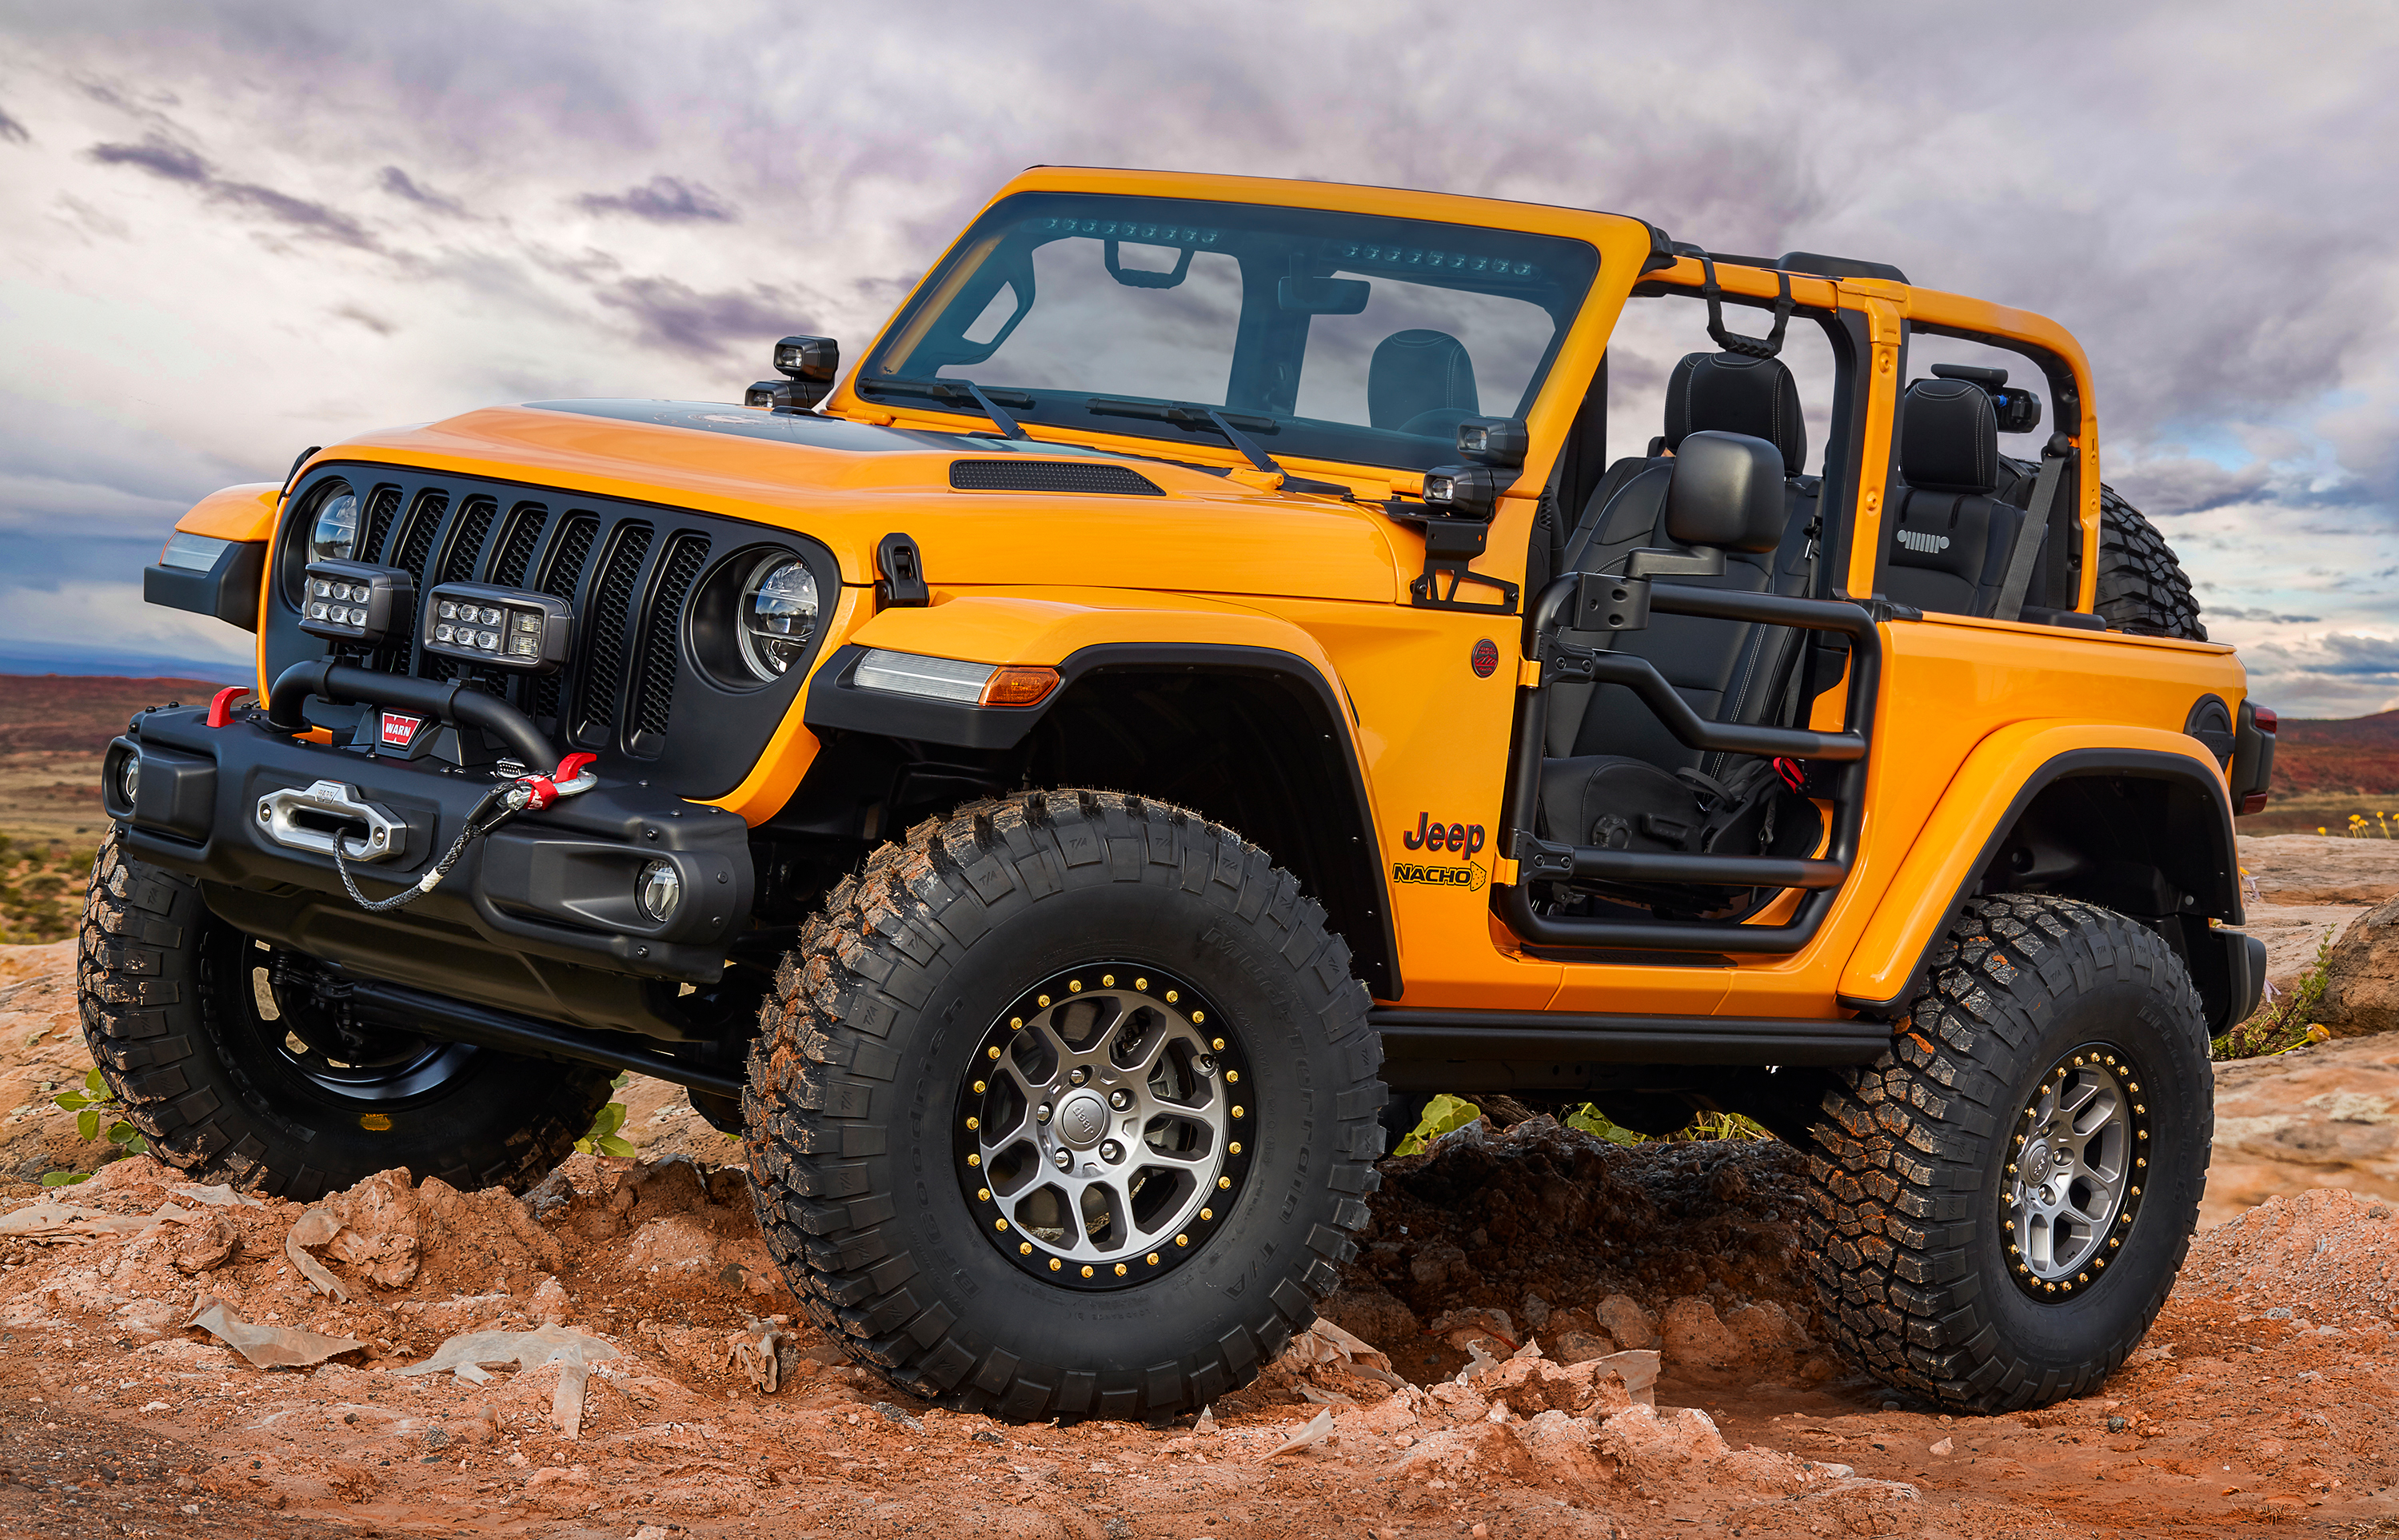 Jeep Brings New Concept Vehicles to Easter Jeep Safari